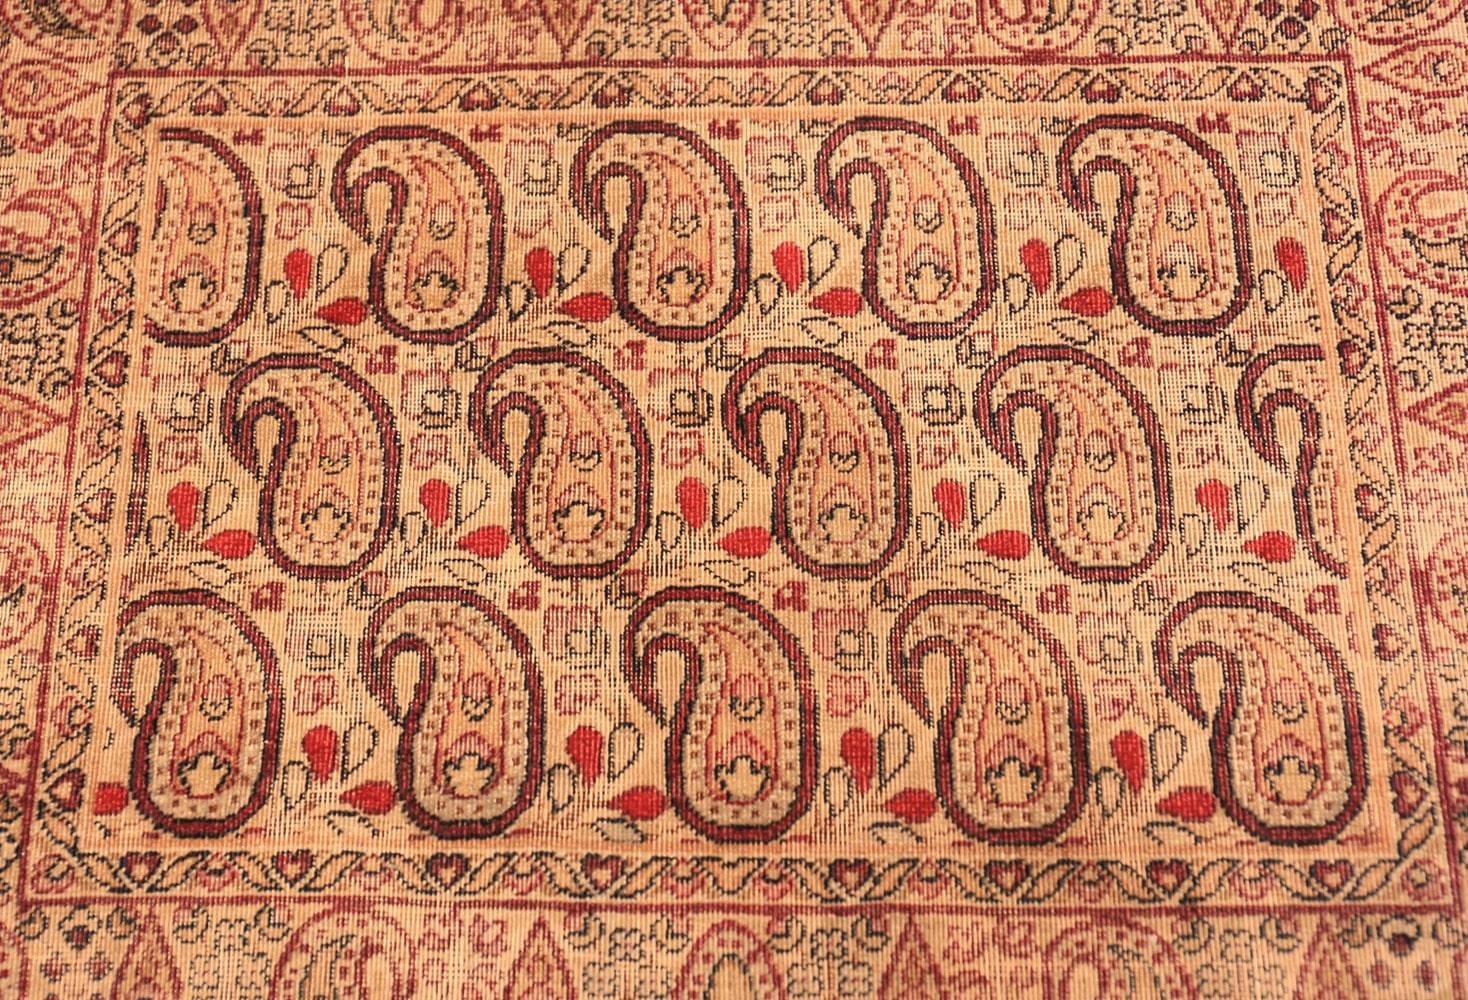 Antique Persian Paisley Kerman rug, country of origin: Persia, date: circa final quarter of the 19th century. Size: 1 ft 9 in x 1 ft 4 in (0.53 m x 0.41 m). 

